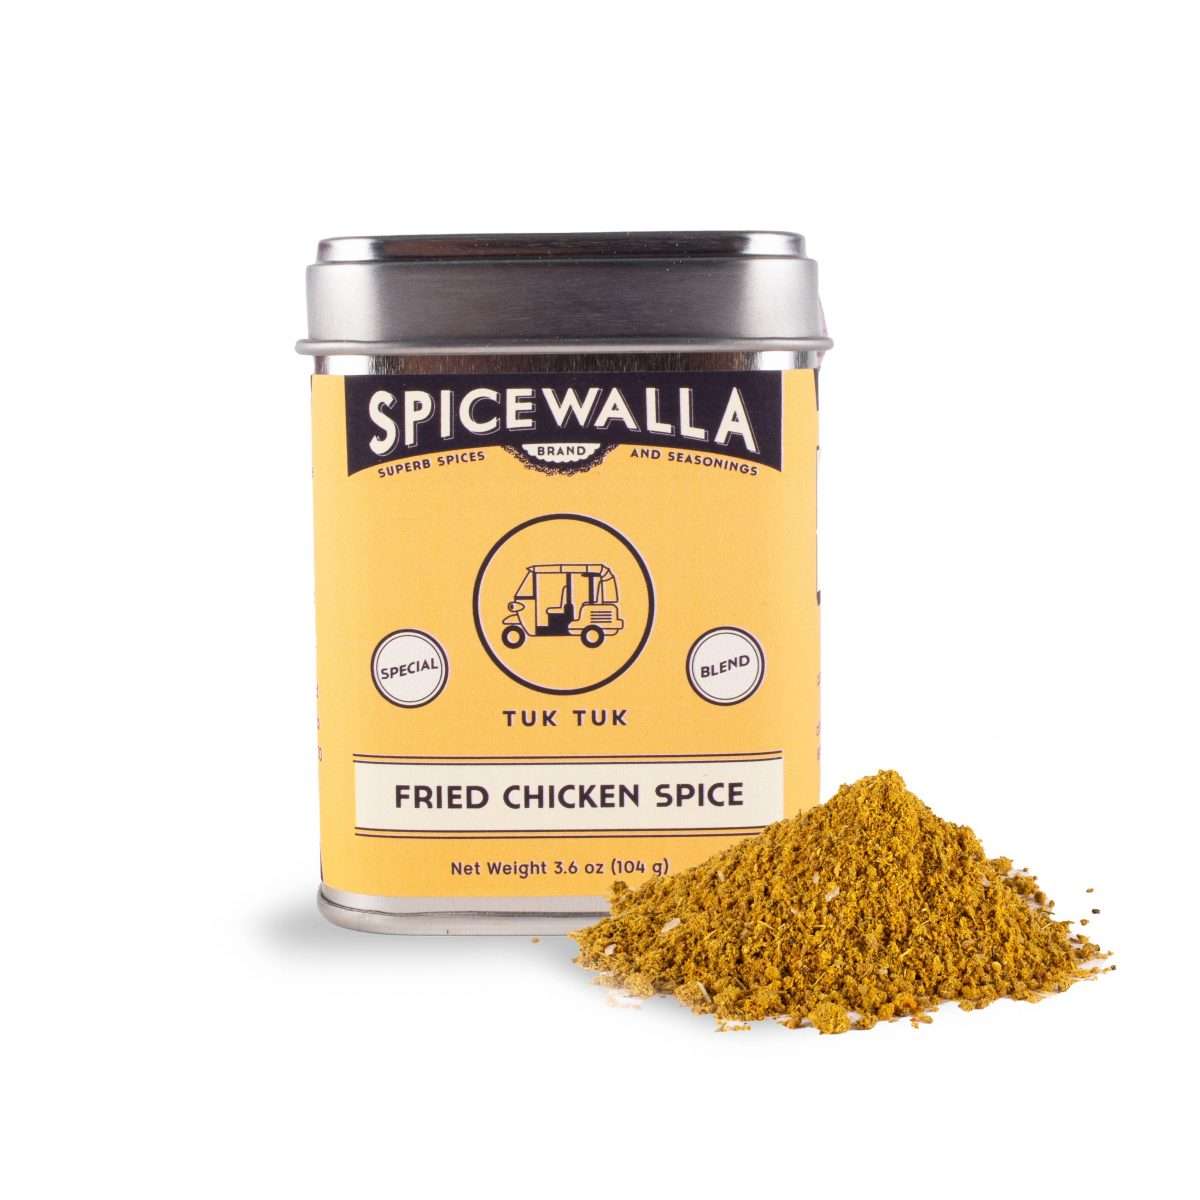 Spicewalla Tuk Tuk's Fried Chicken spice in a large tin.